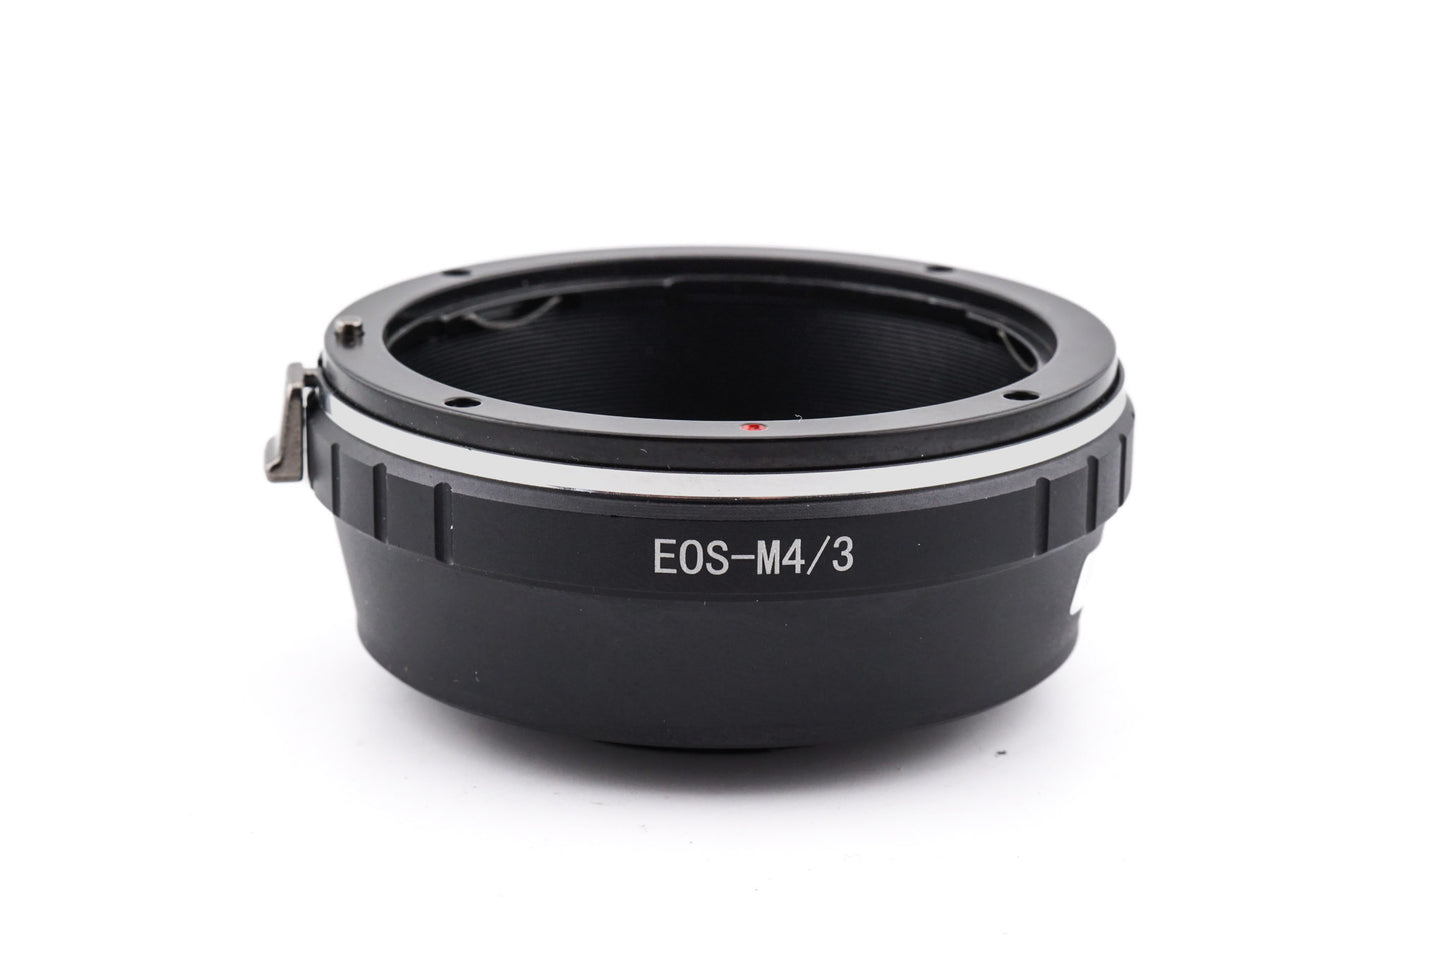 Generic Canon EF - M4/3 Adapter (EOS-M4/3) - Lens Adapter